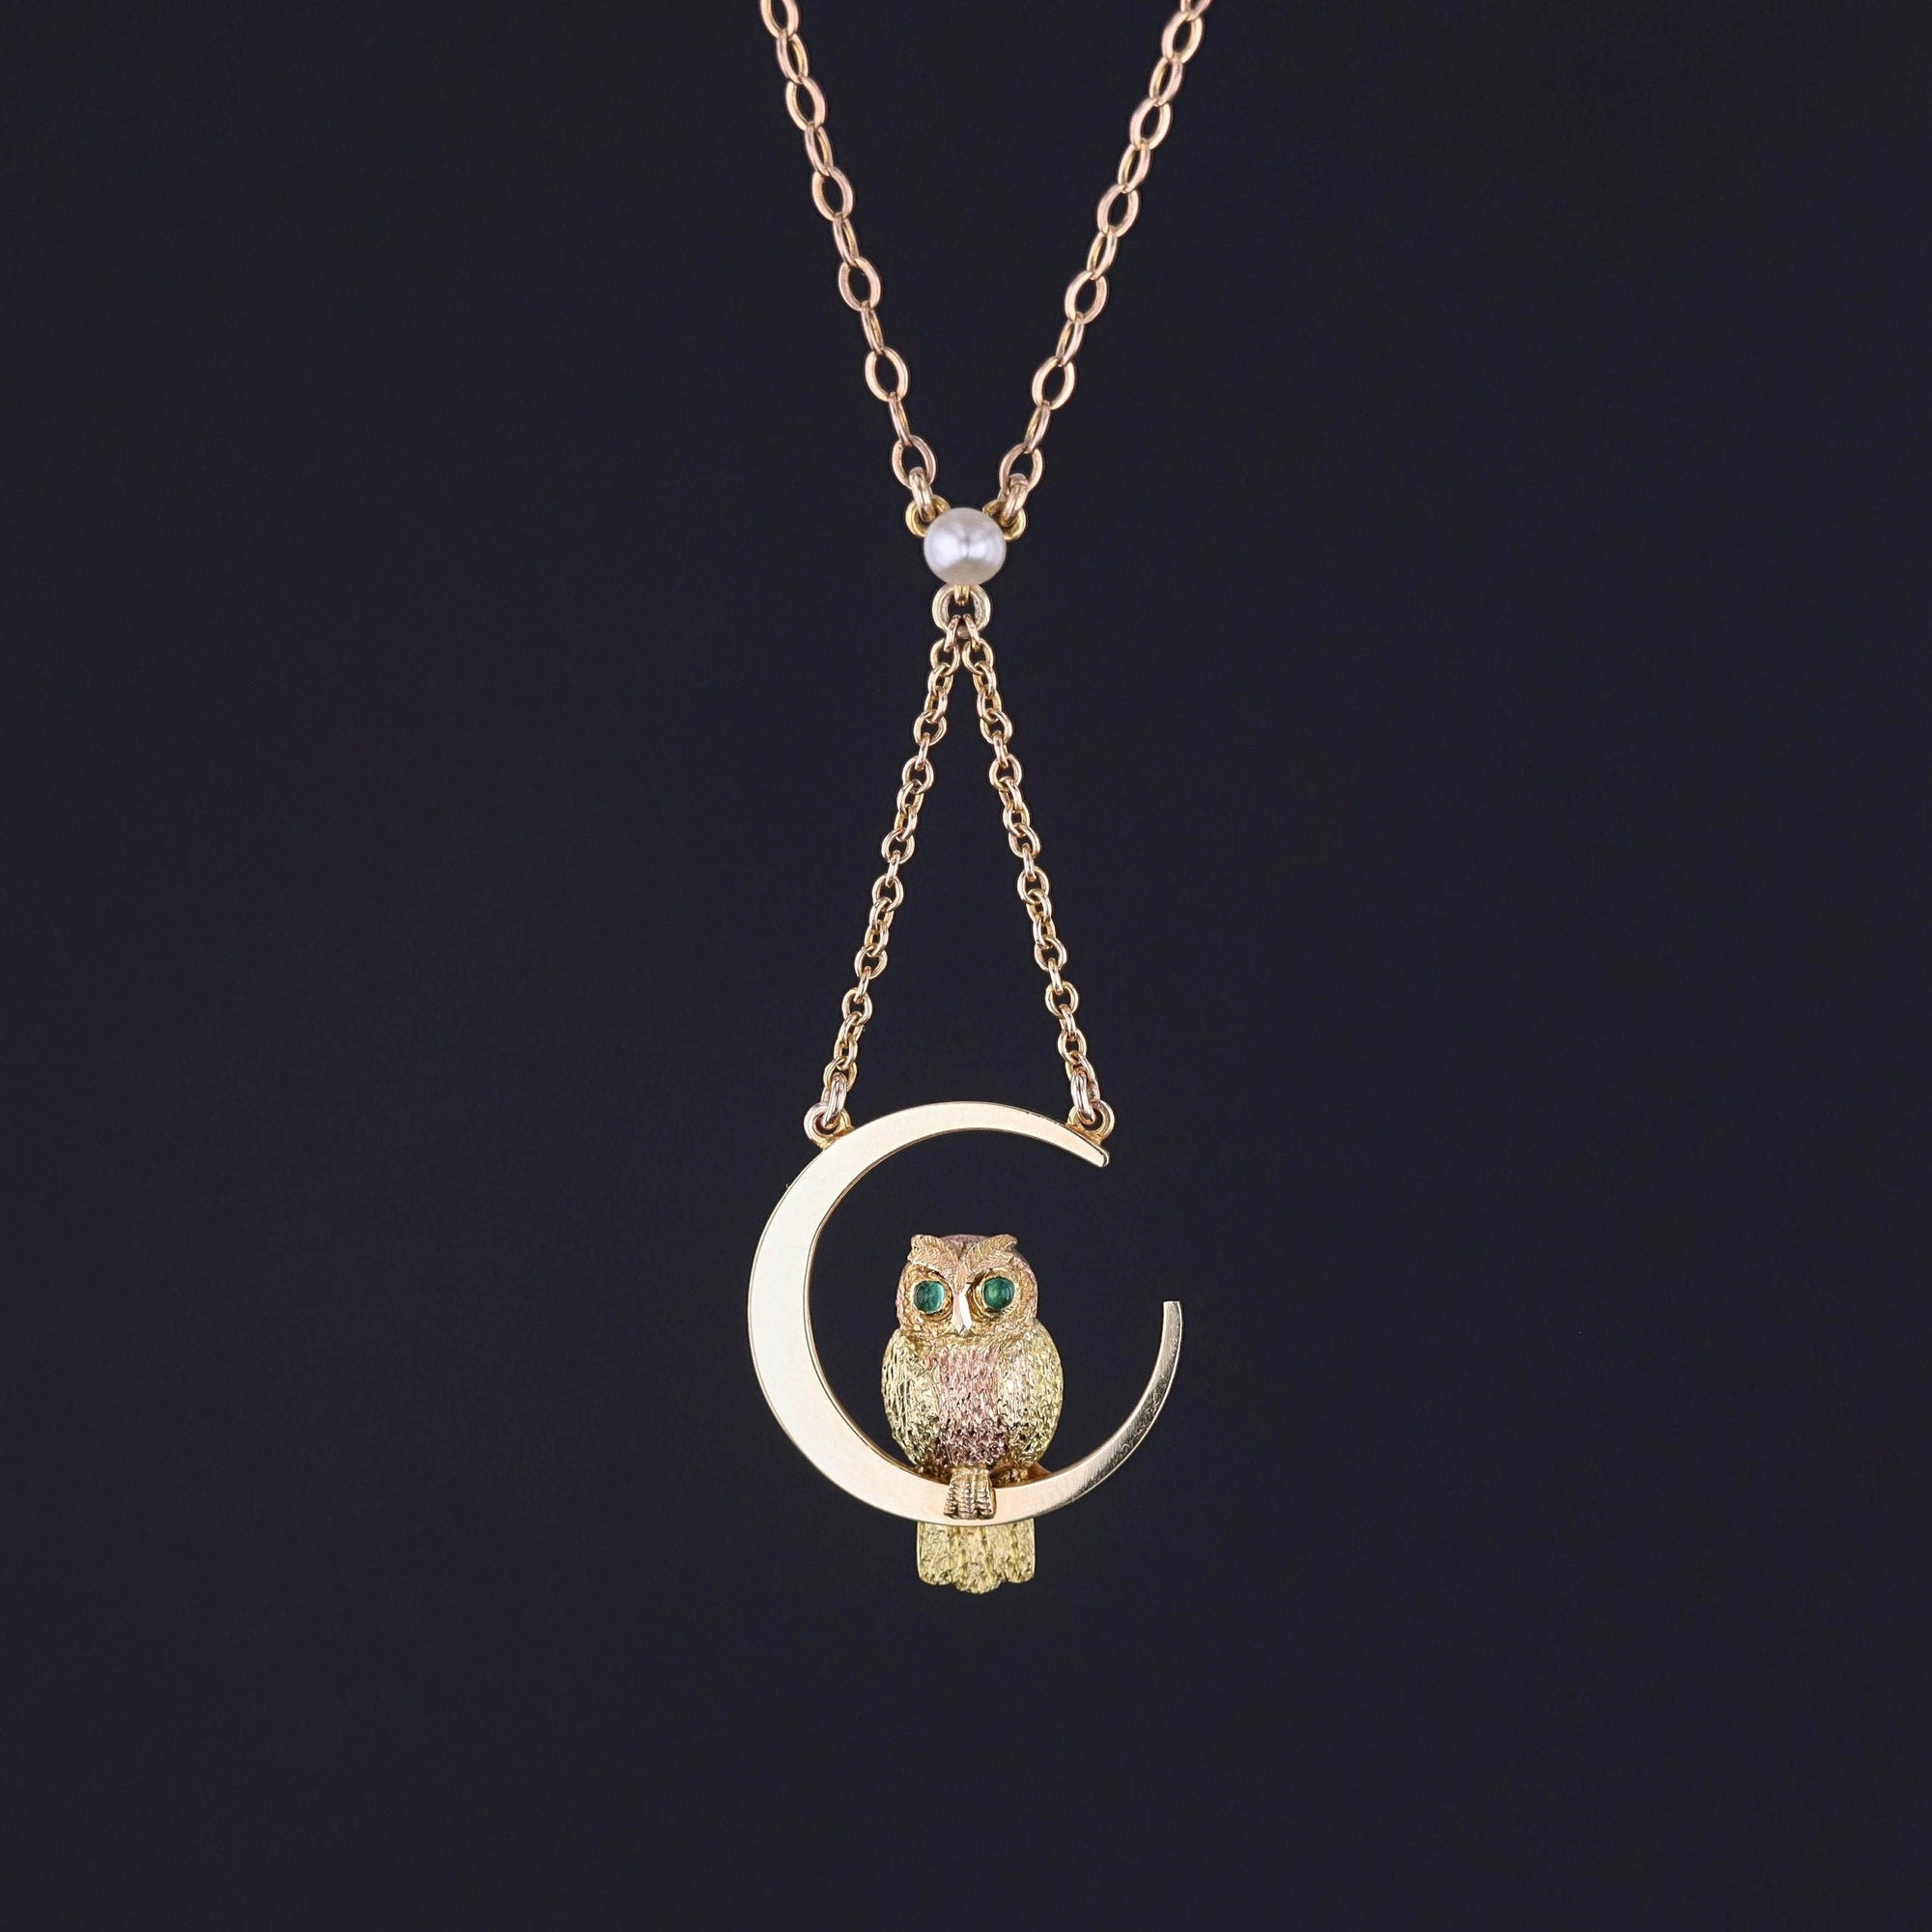 Antique Owl Necklace of 9ct Gold